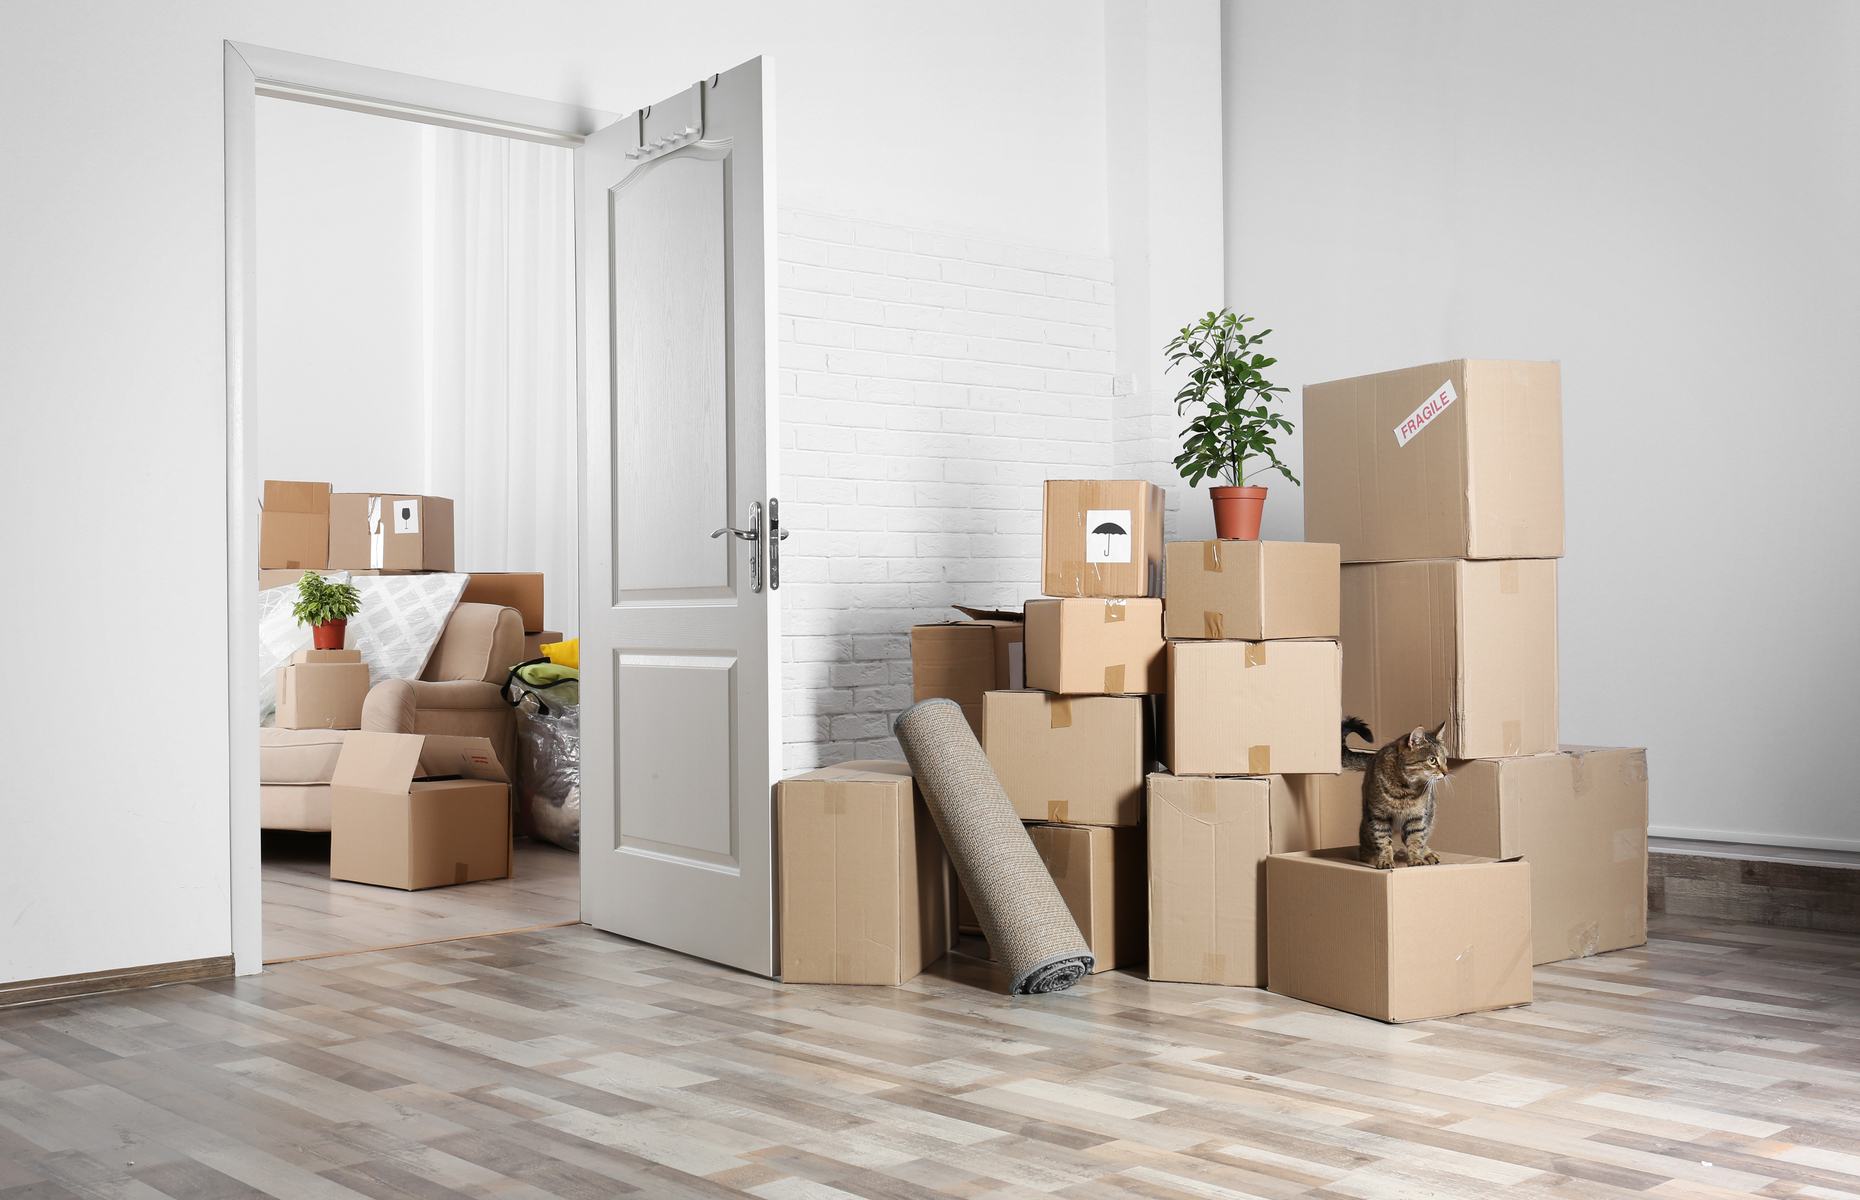 Unless unavoidable, homeowners and renters are being advised to postpone moving until after lockdown. Image: Africa Studio / Shutterstock